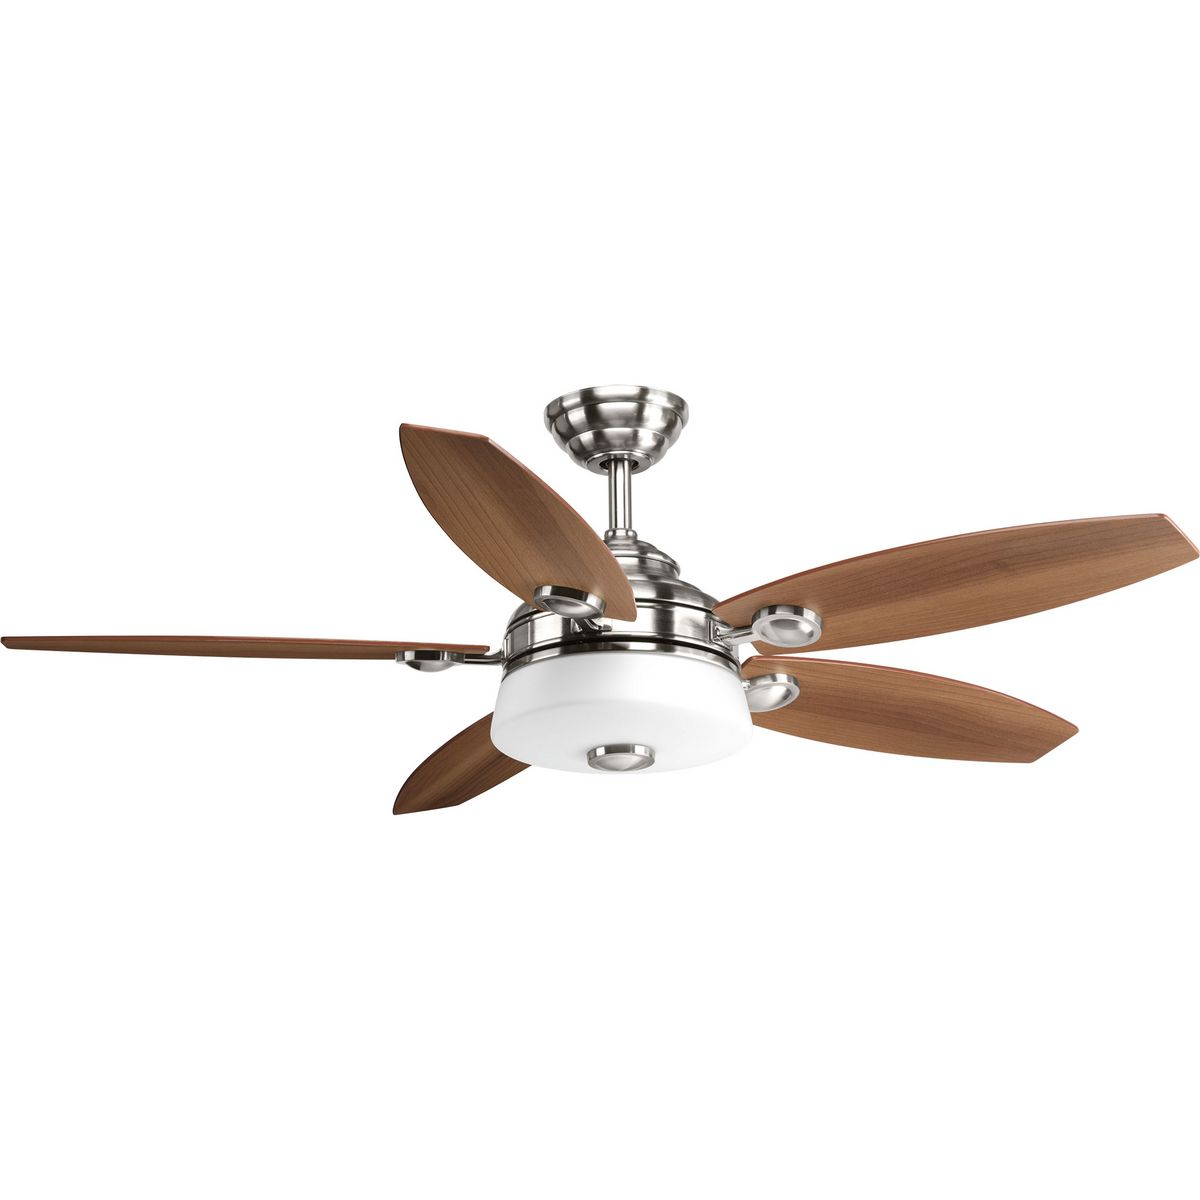 Refresh your living space with the crisp, clean style of the 54 inch Graceful fan. The stylish design comes with five reversible blades in medium cherry and silver in a Brushed Nickel finish. The five-blade fan features a white opal glass shade and a 17W dimmable LED module. A remote with batteries is included � and controls full range dimming and fan speed capabilities. LED source offers a 3000K-color temperature, energy savings and maintenance benefits for the home. Graceful also has a reversible motor that can be accessed via a manual switch.